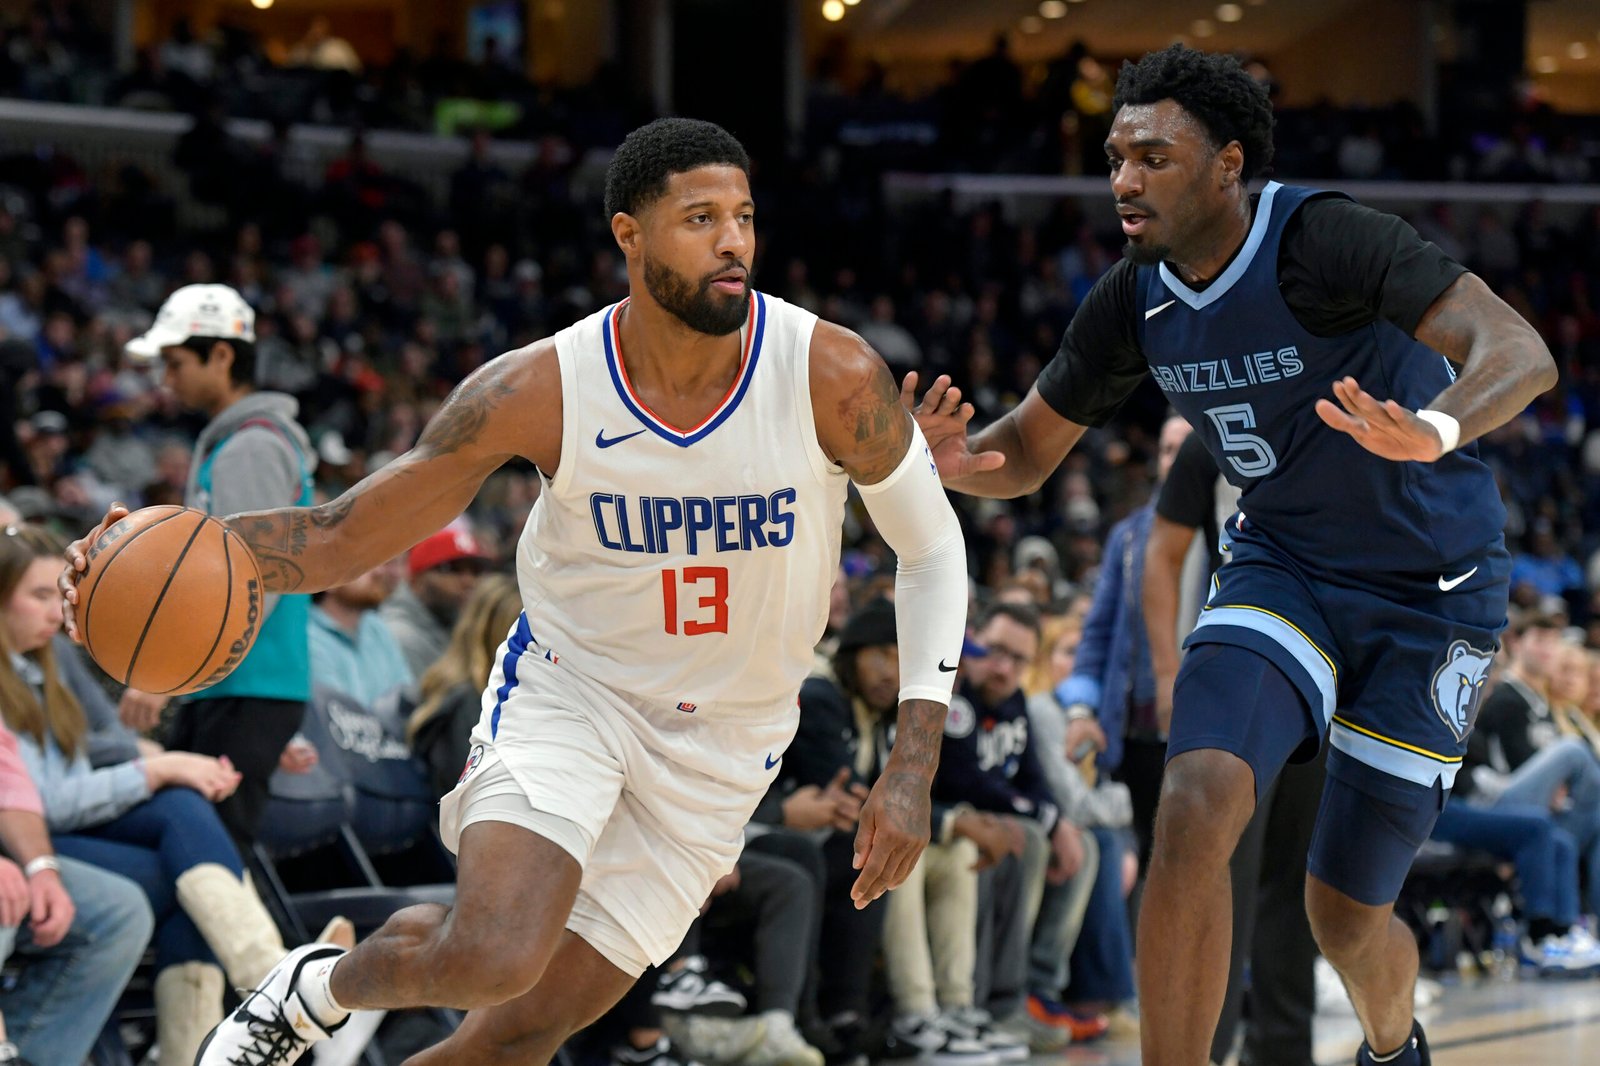 Clippers, led by Paul George, turn back Grizzlies